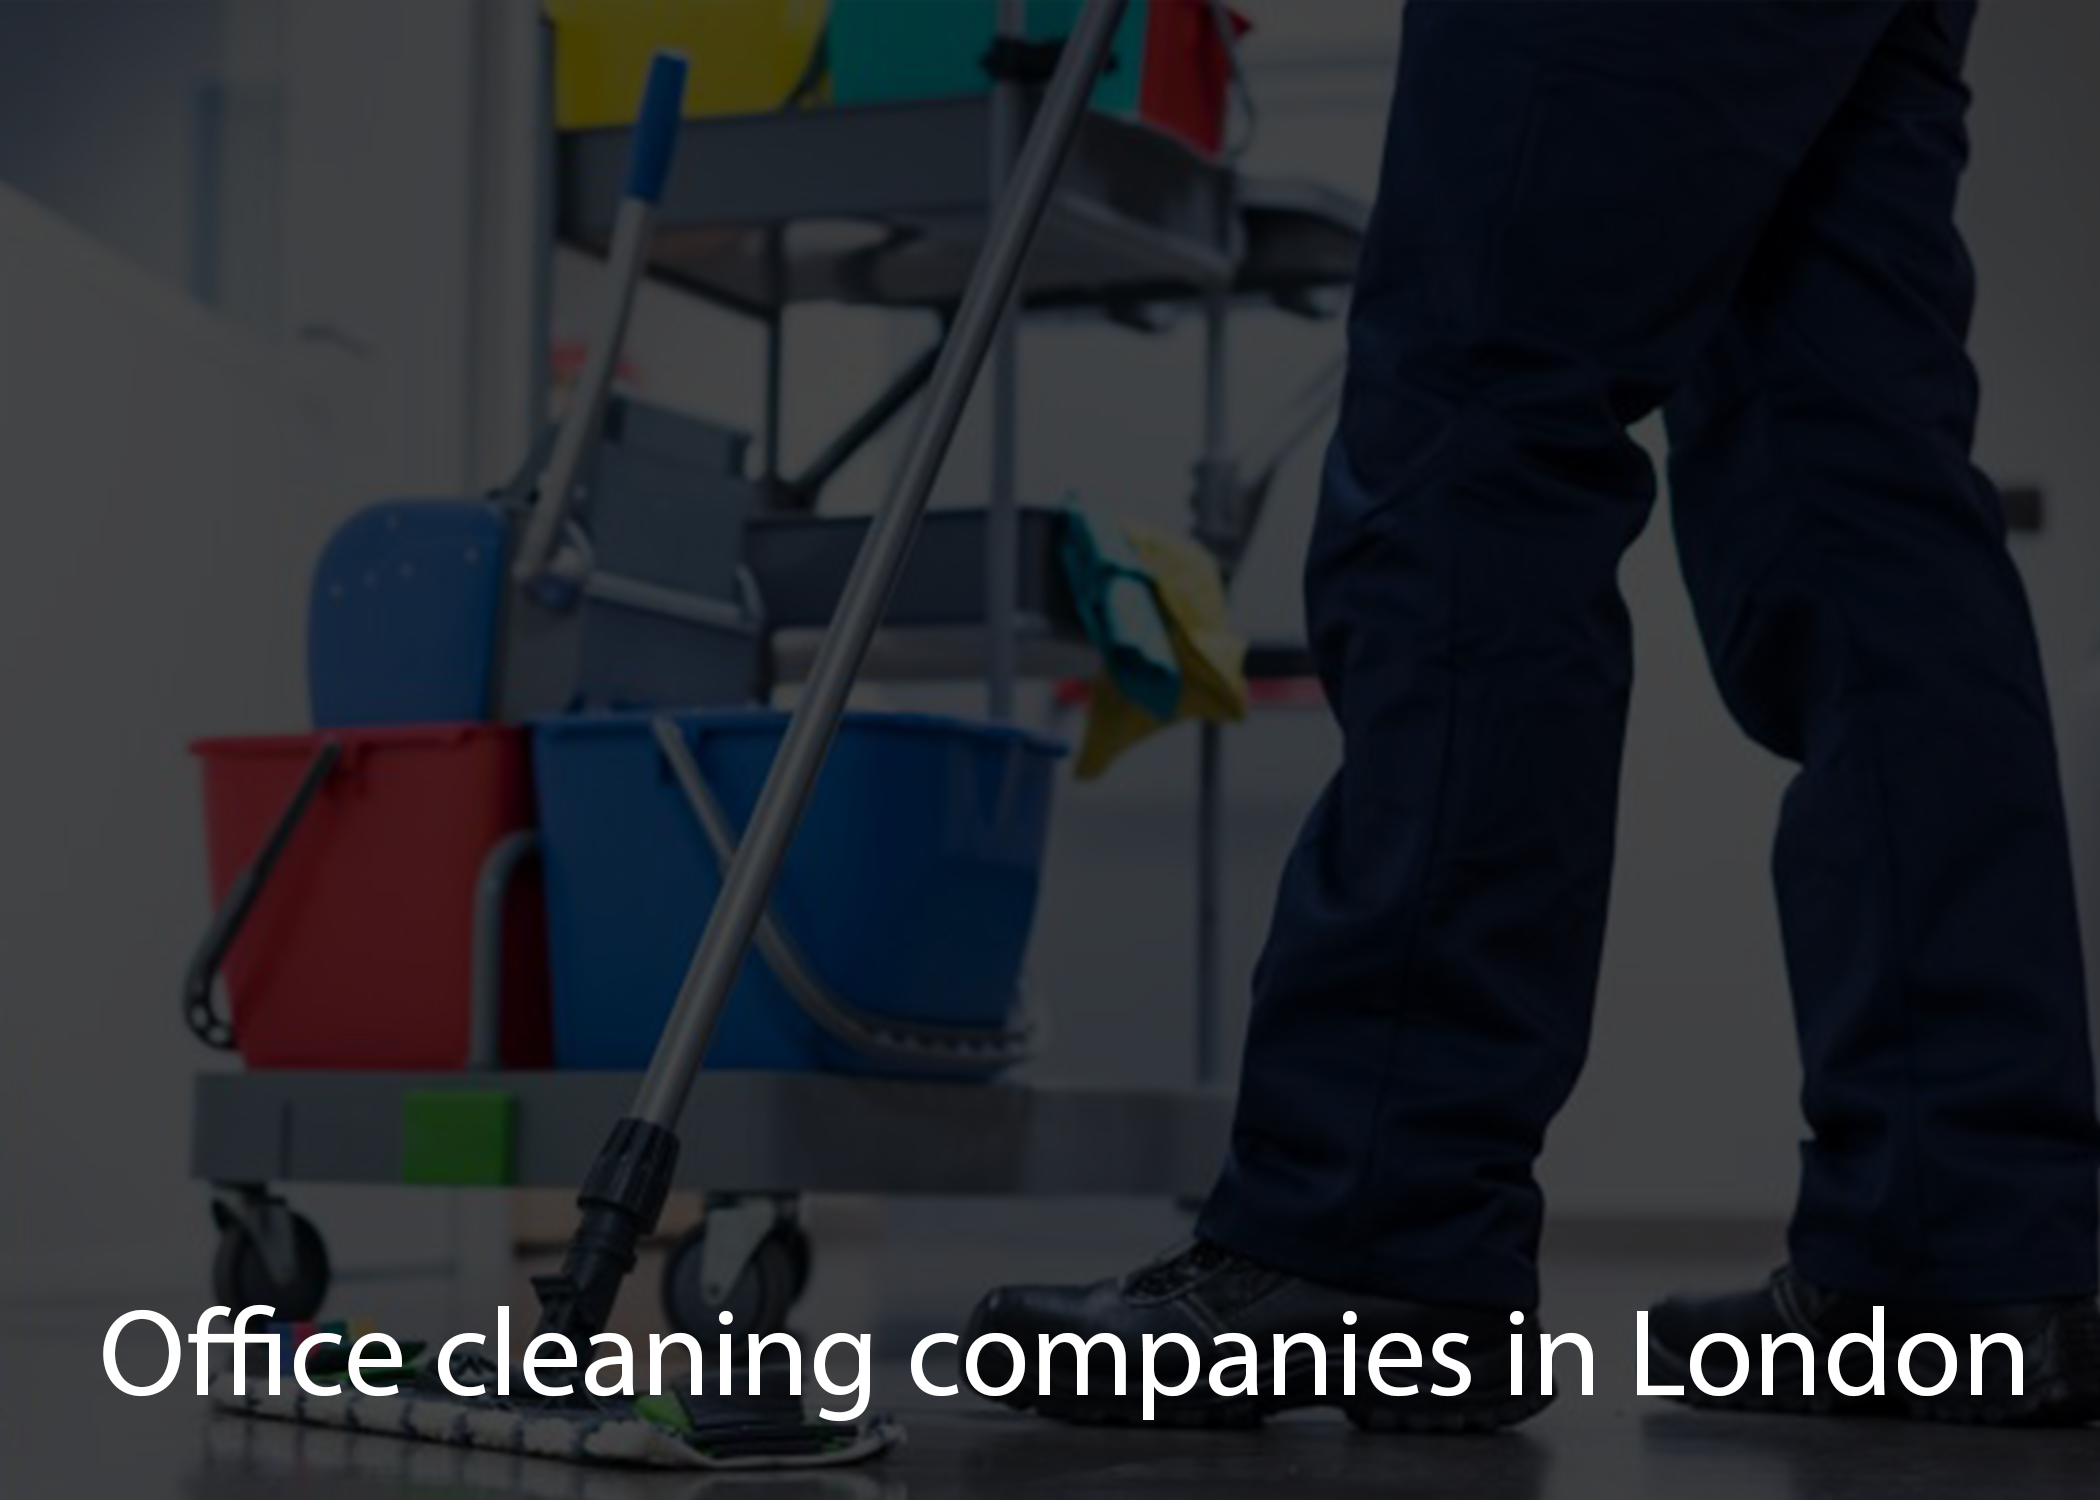 Office cleaning companies in London